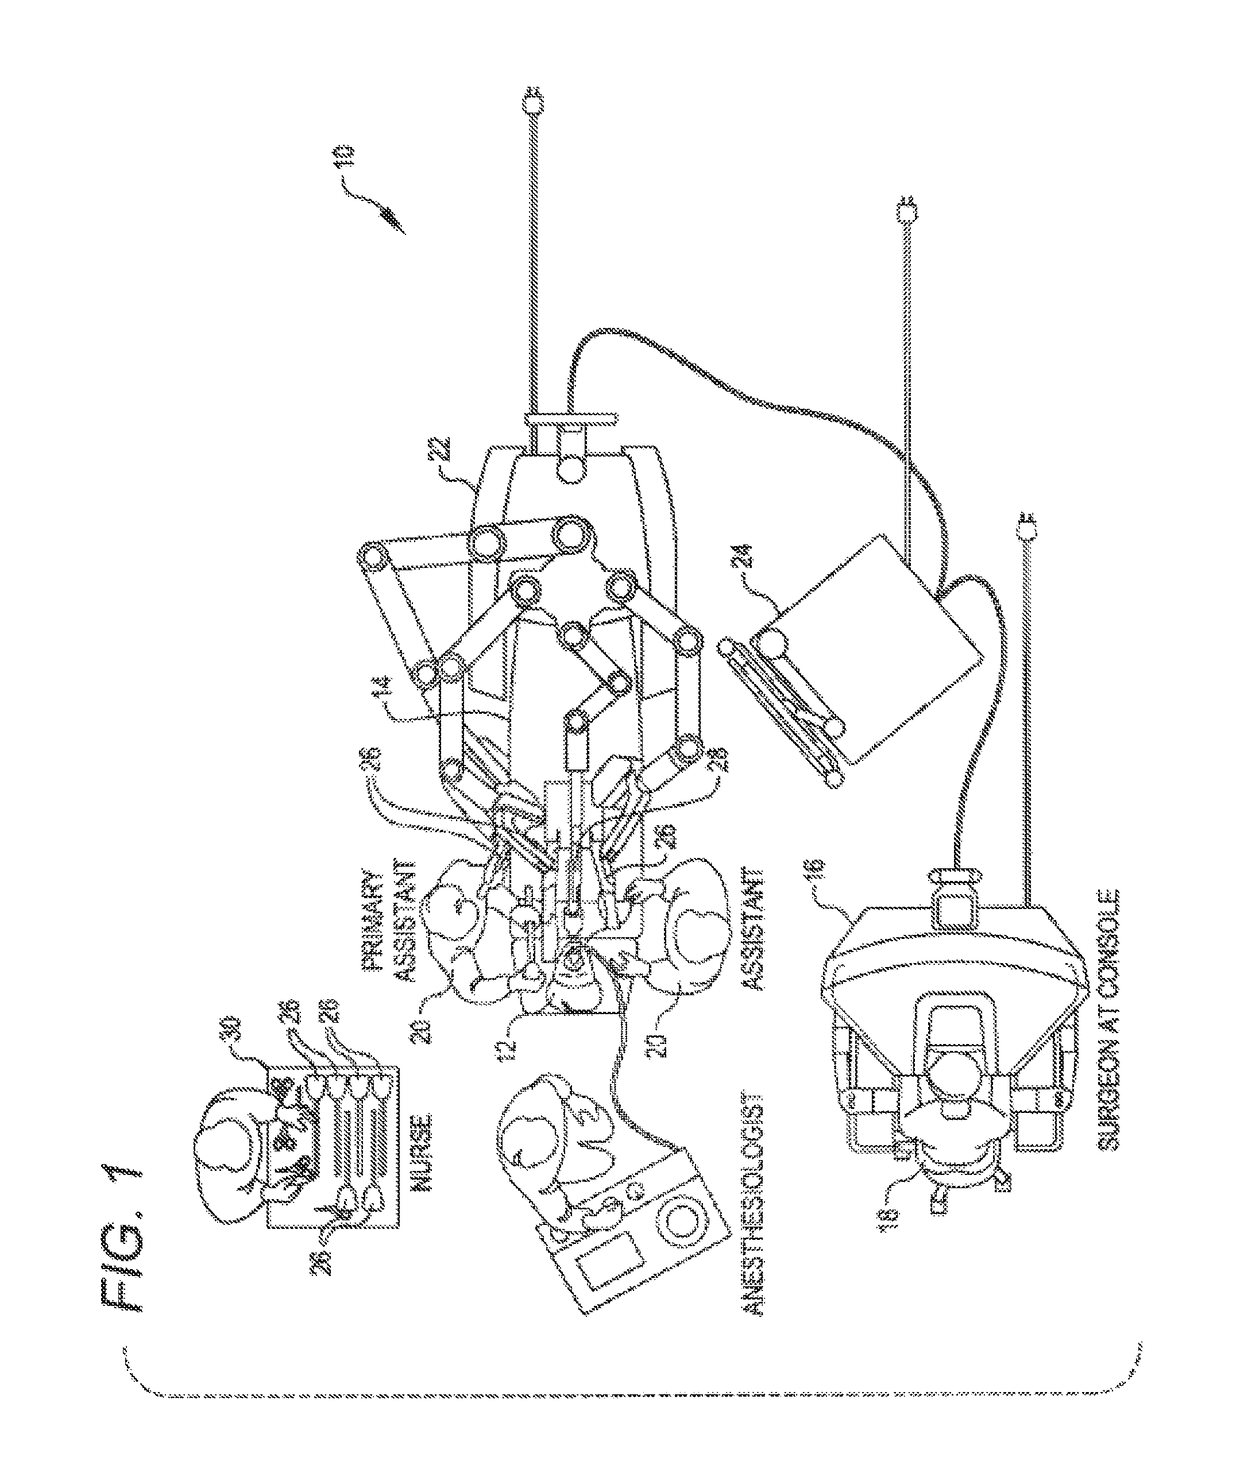 Active and semi-active damping in a telesurgical system